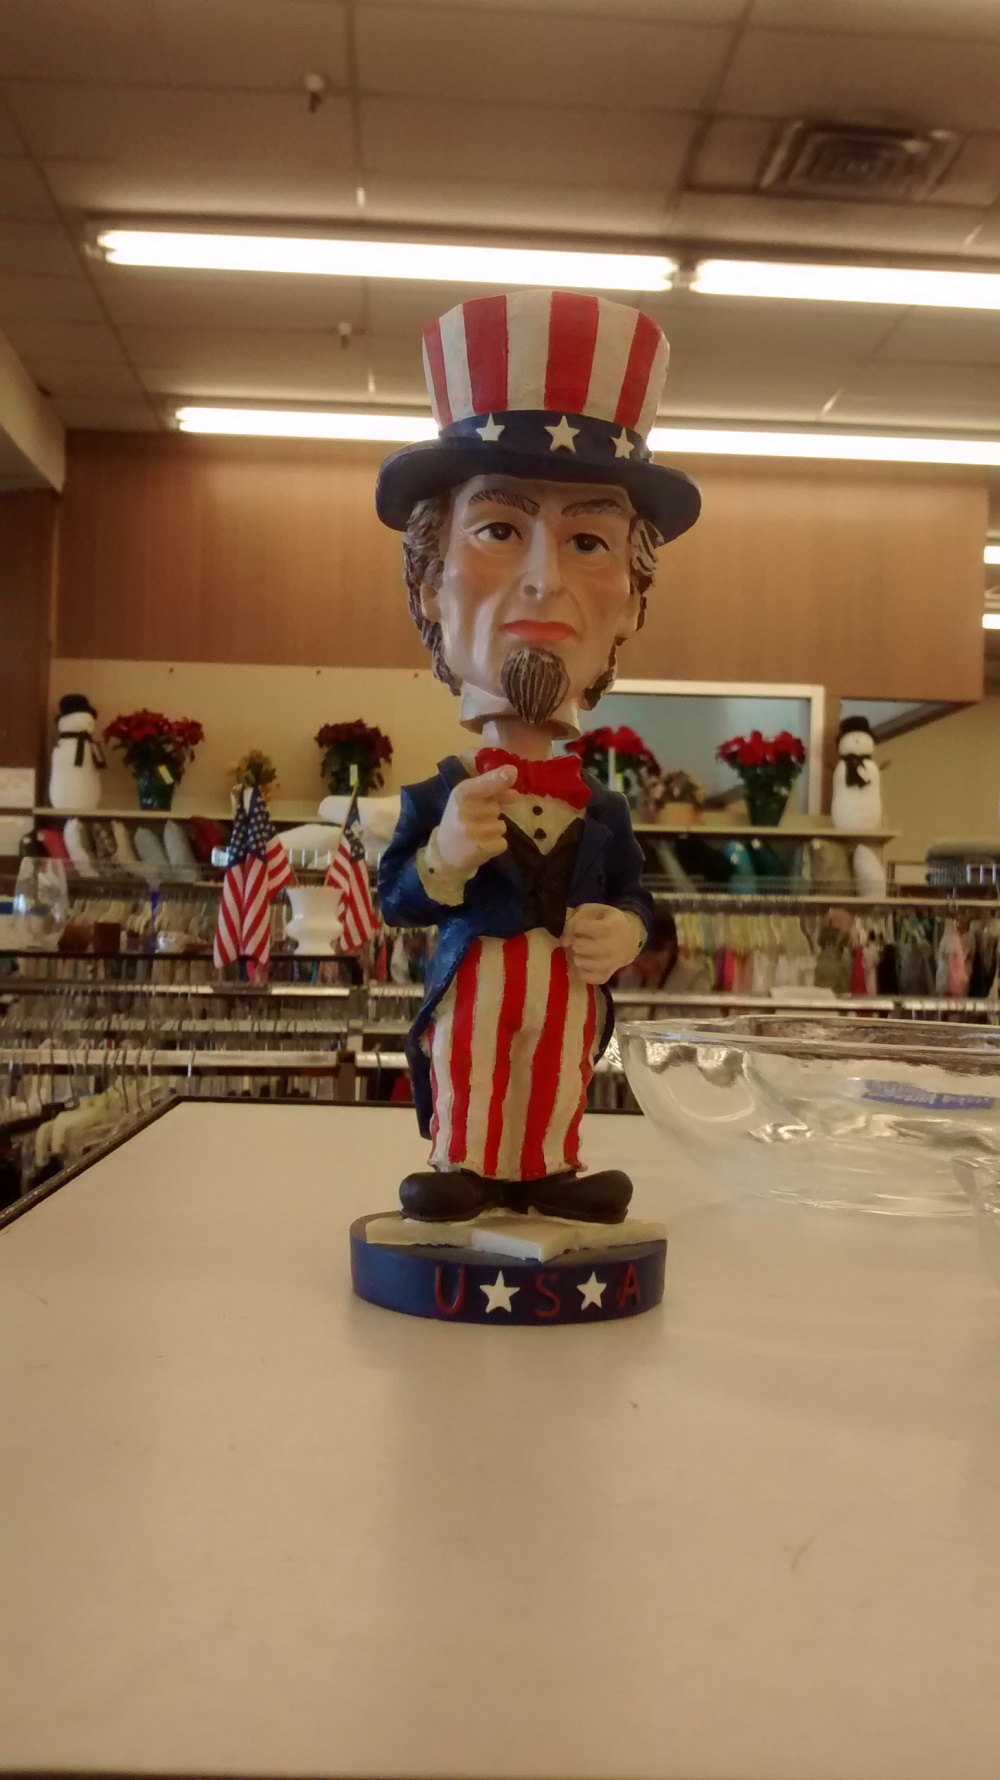 Porcelain bobble-head Uncle Sam. He reminds me of old pictures of President Andrew jackson.